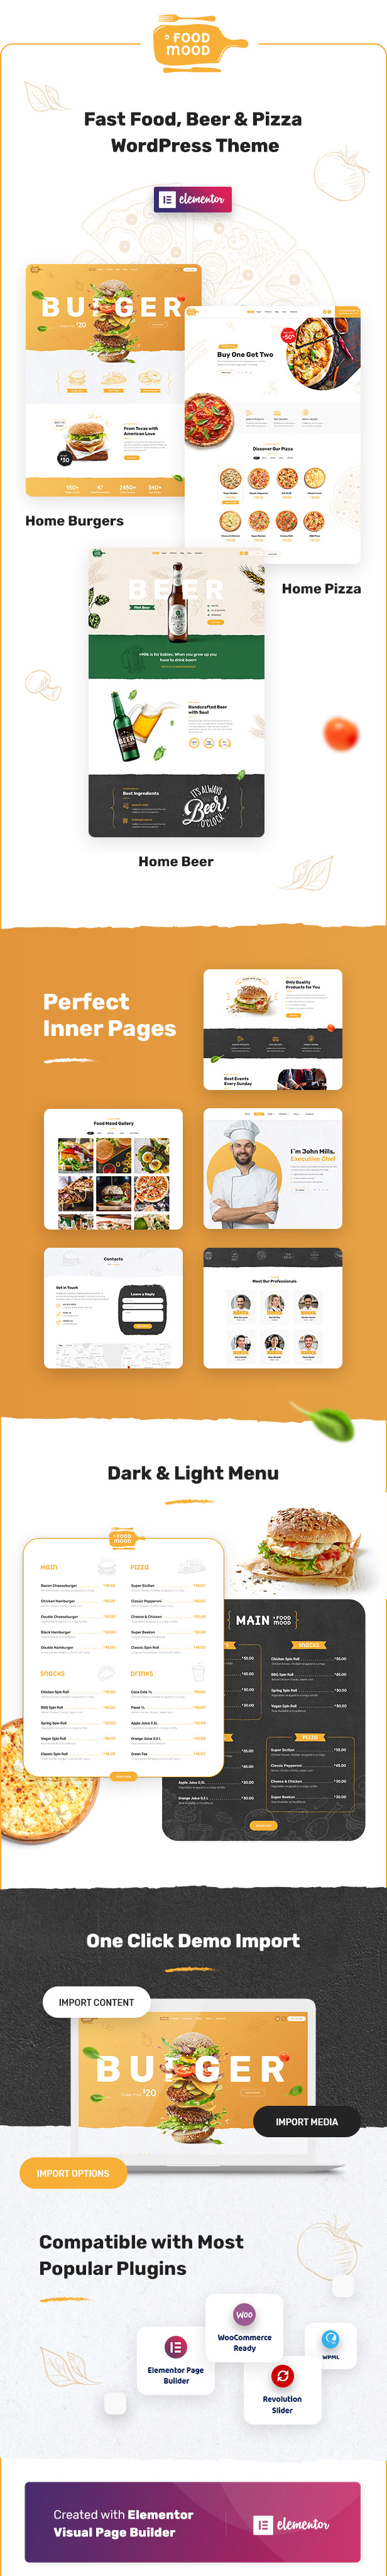 Foodmood - Cafe & Delivery WordPress Theme - 1